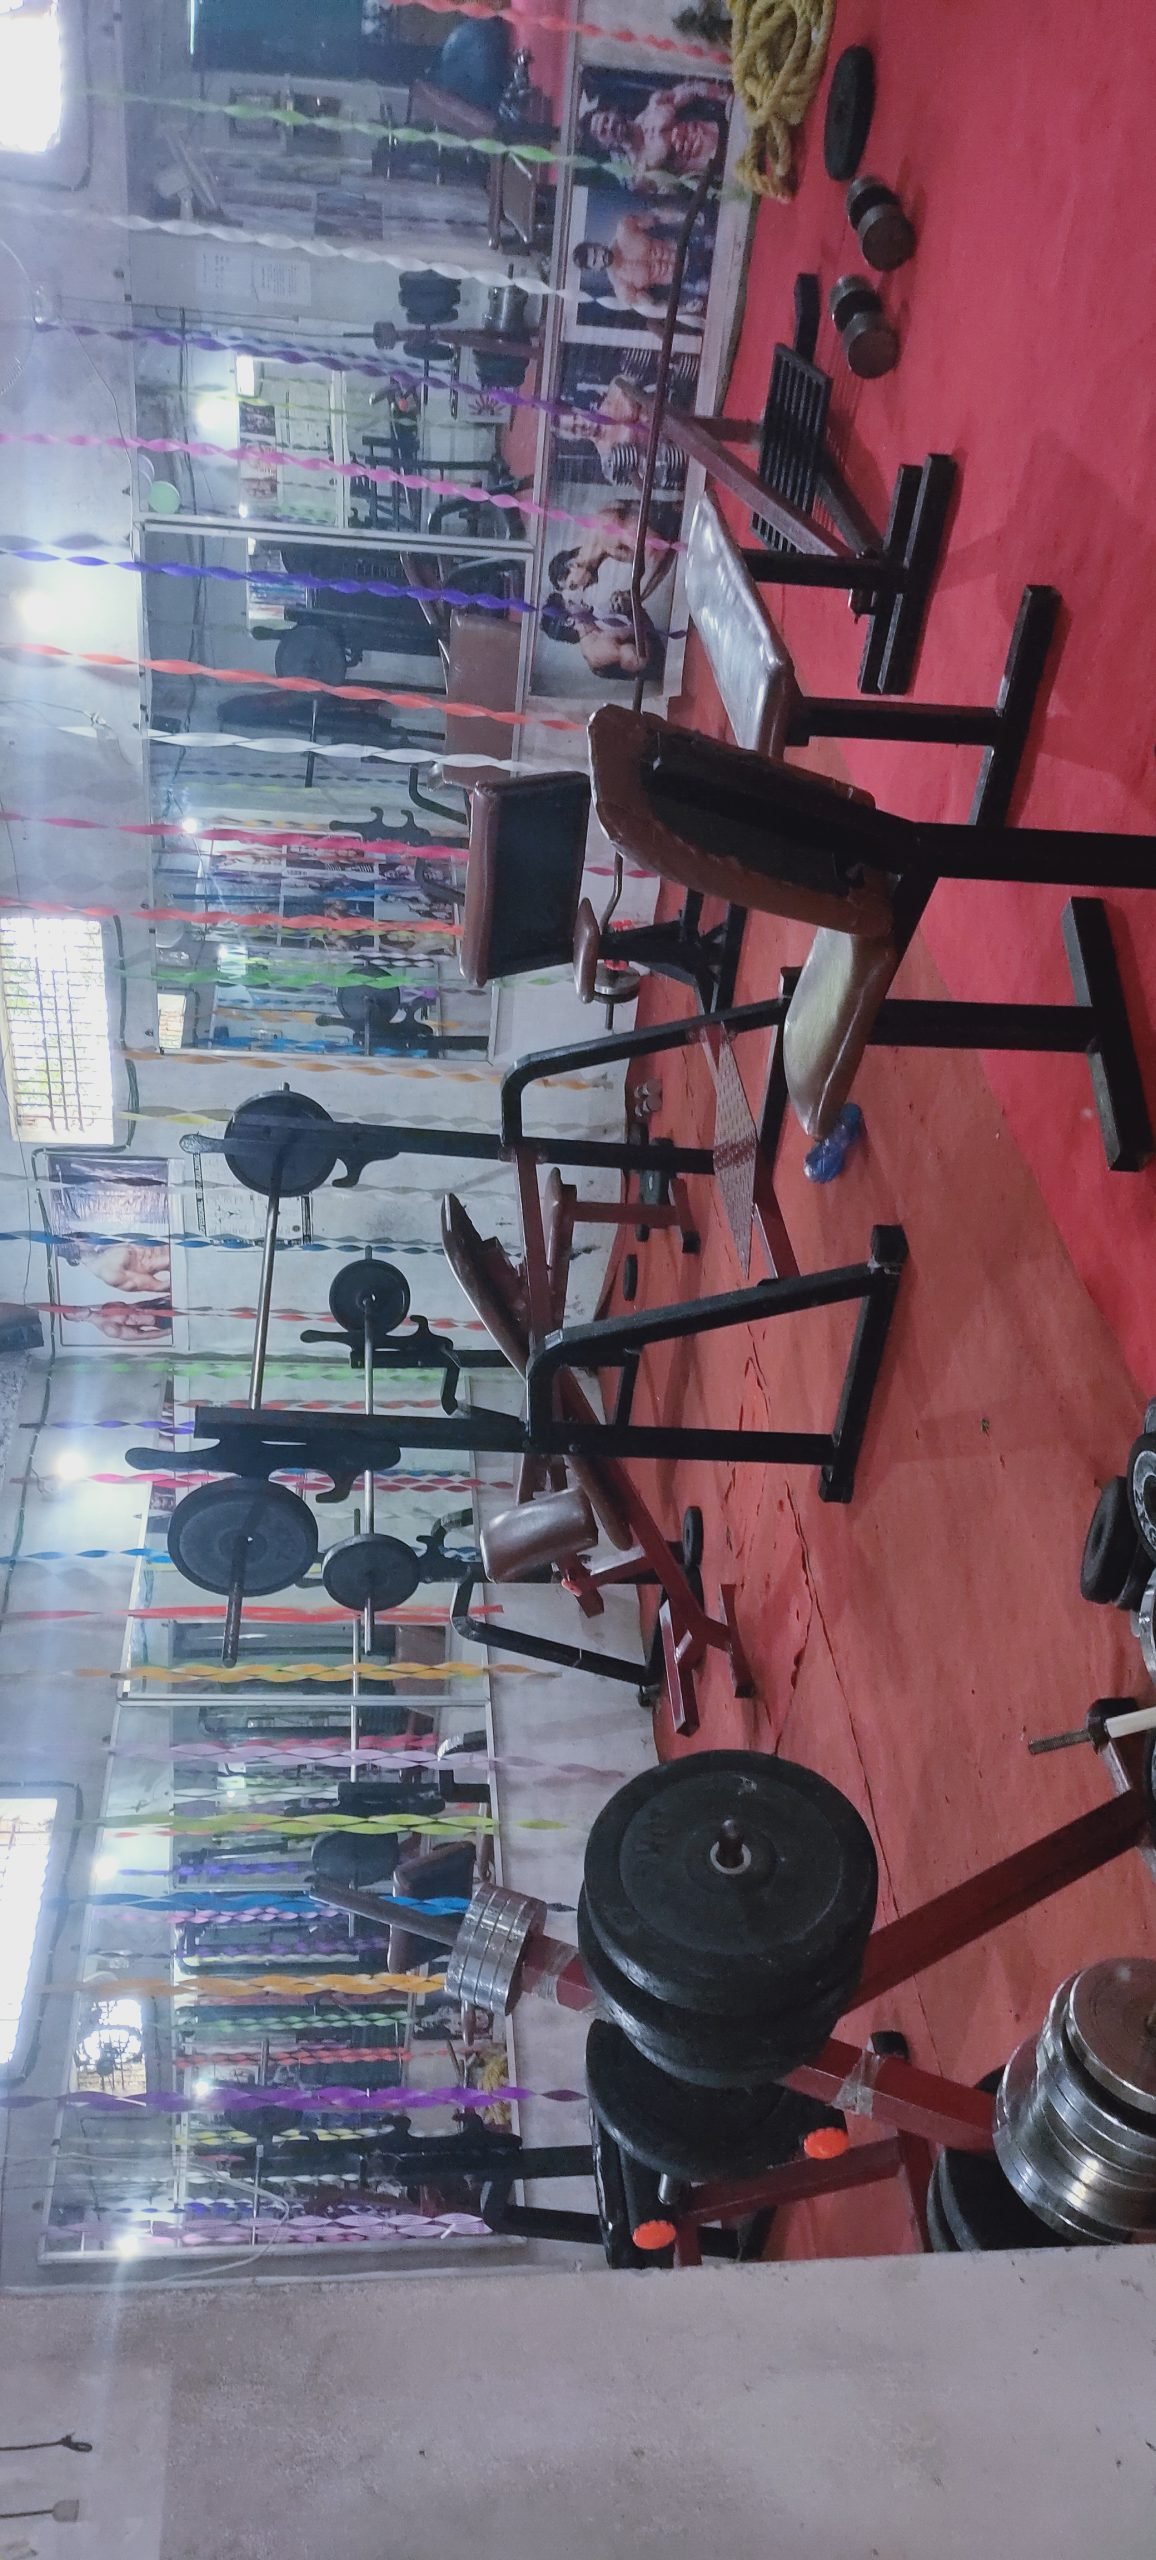 Well maintained gym equipment and 10 pis glass